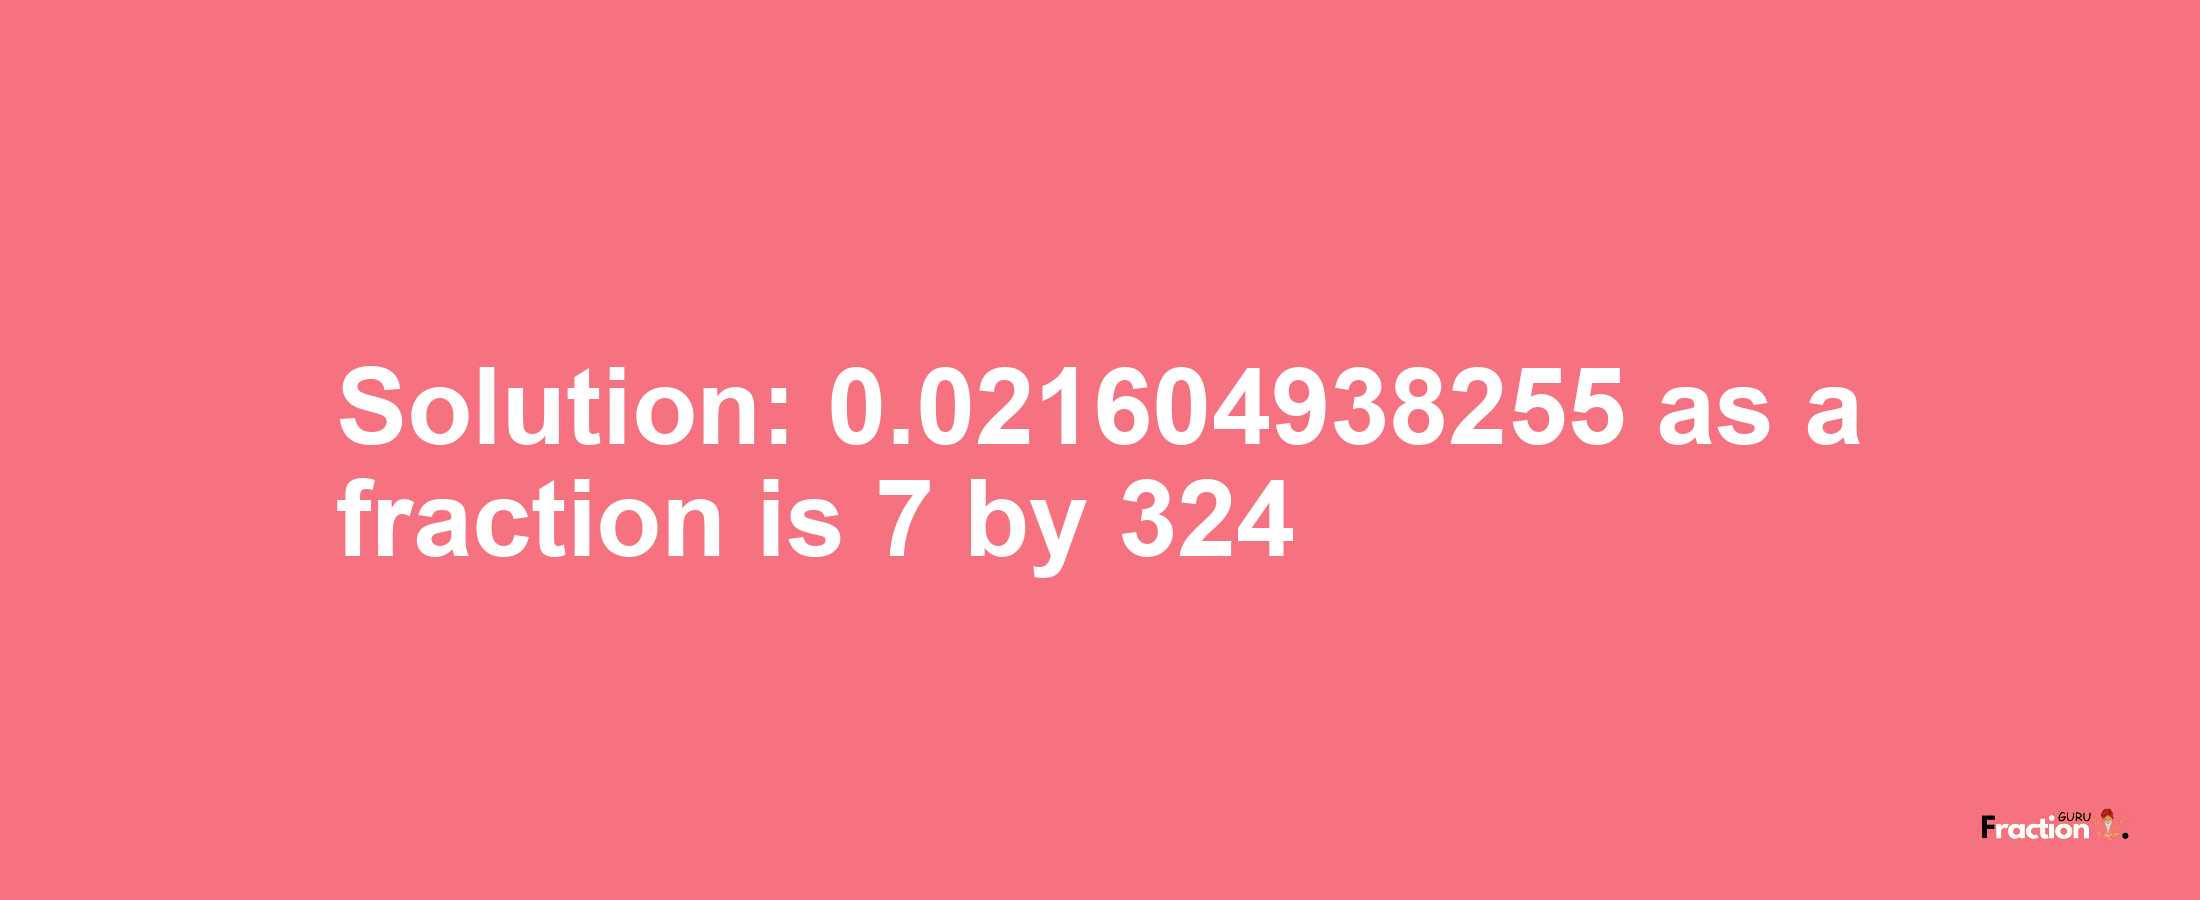 Solution:0.021604938255 as a fraction is 7/324